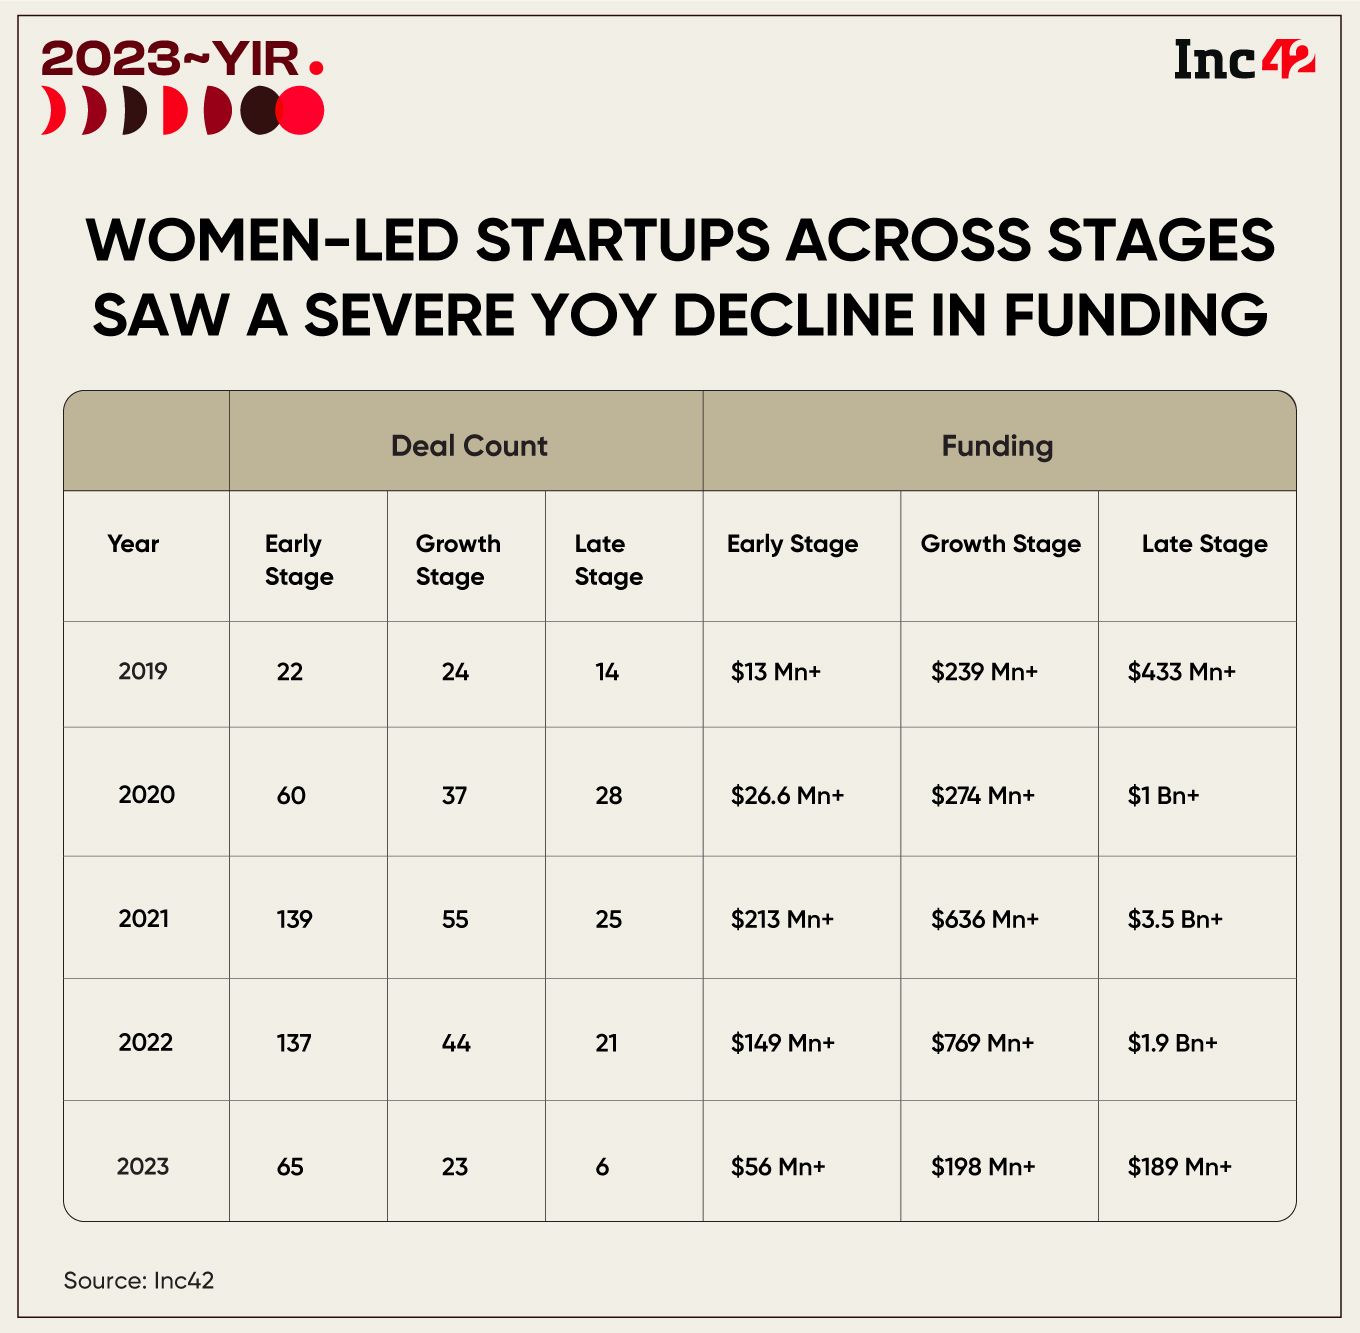 Women Tech Startup Funding Tanks 80% In 2023. But Is All Hope Lost?